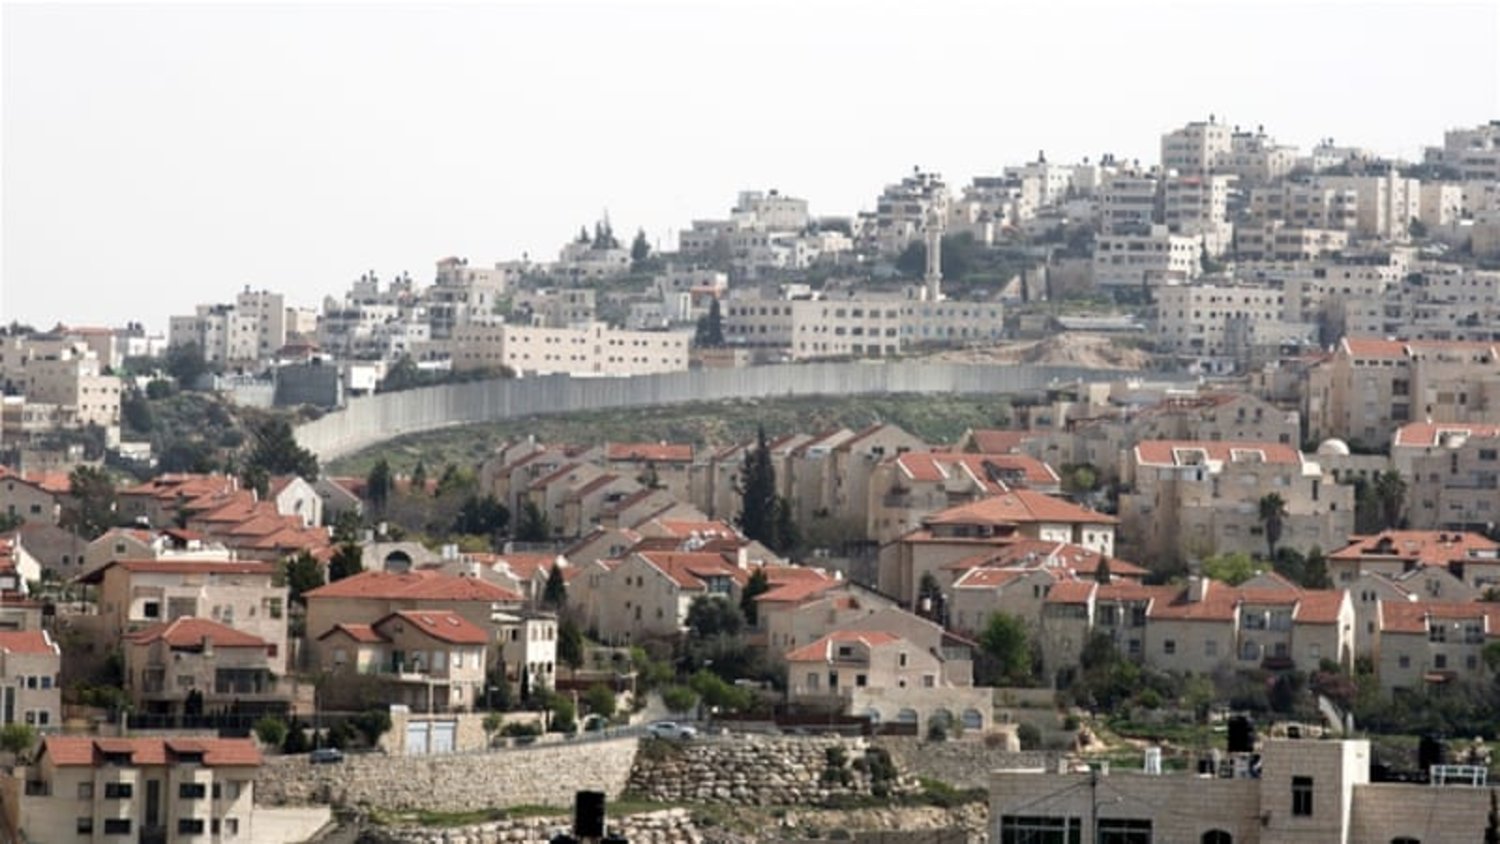 More than 600,000 Israelis live in settlements in the West Bank, including East Jerusalem [Reuters]